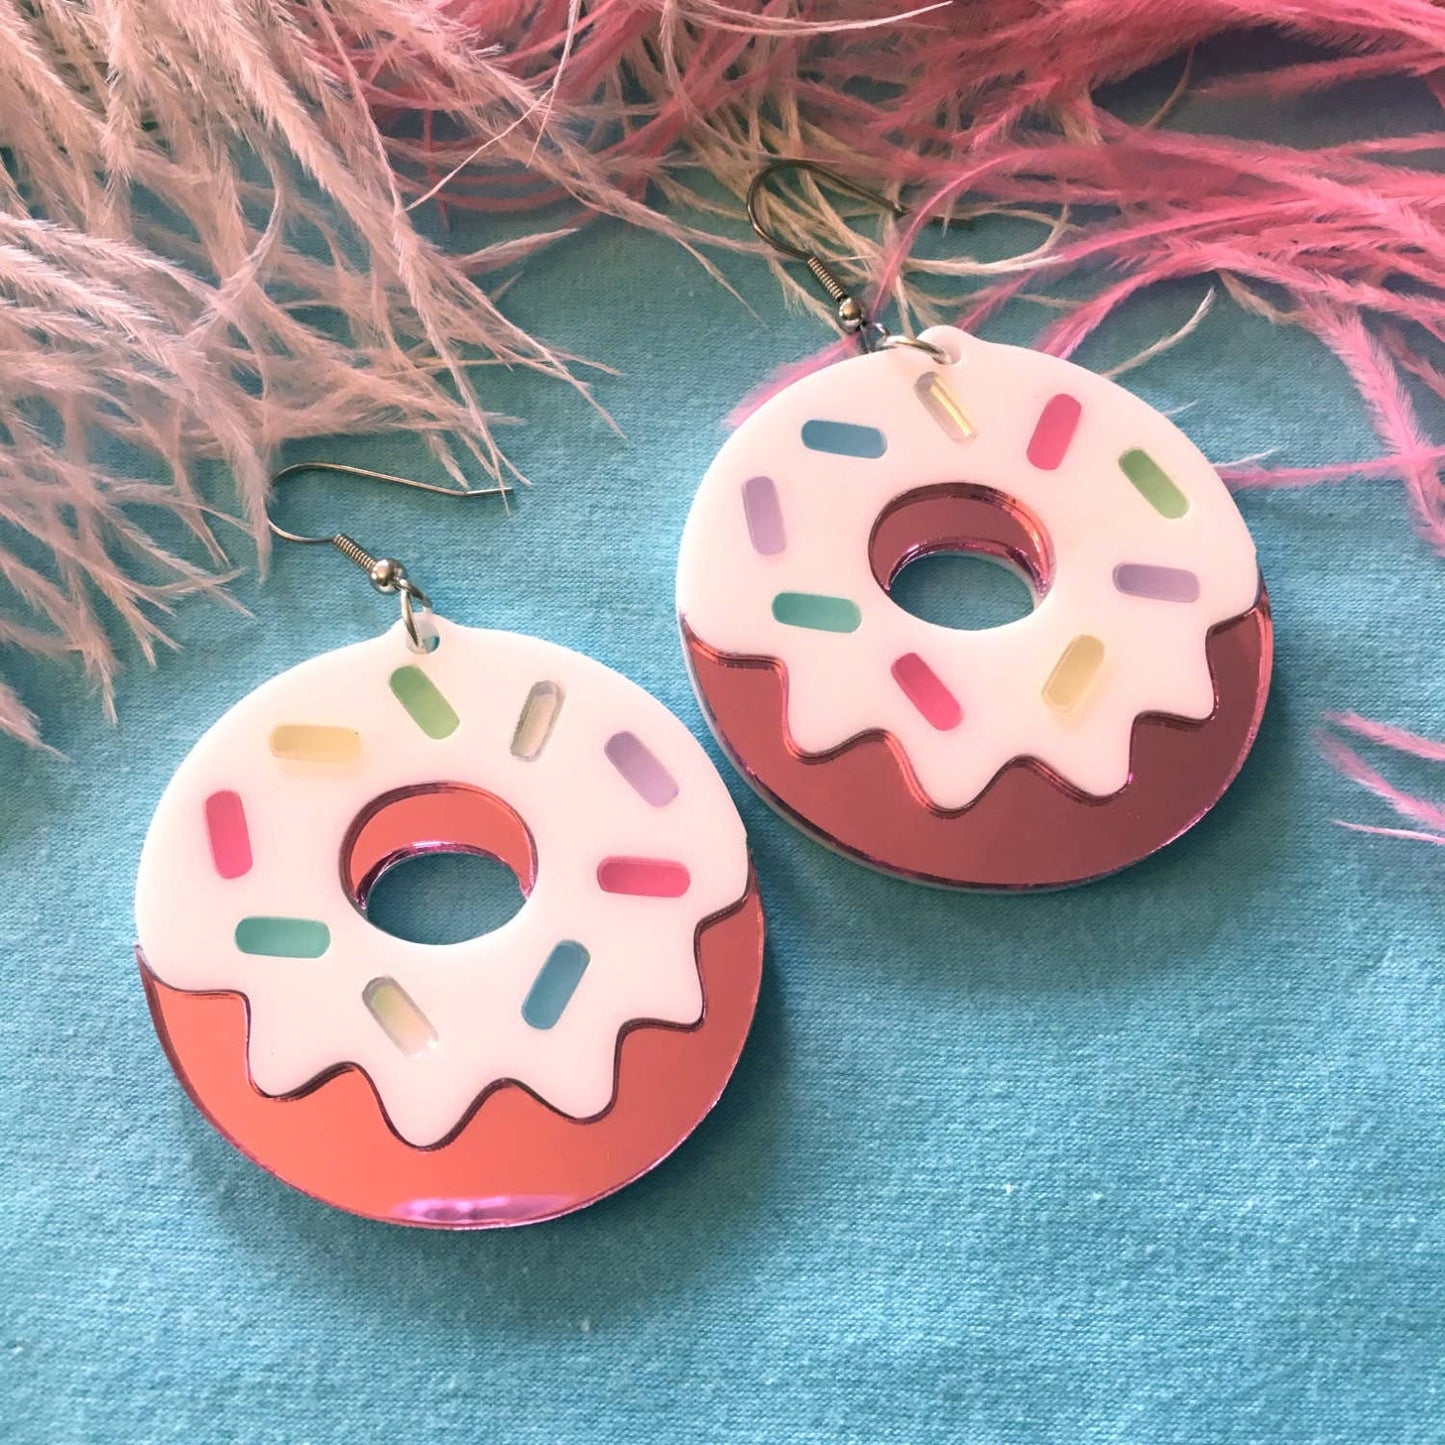 I'm Your Present - Pink Mirrored And Pastel Sprinkles Doughnuts Laser Cut Acrylic Earrings